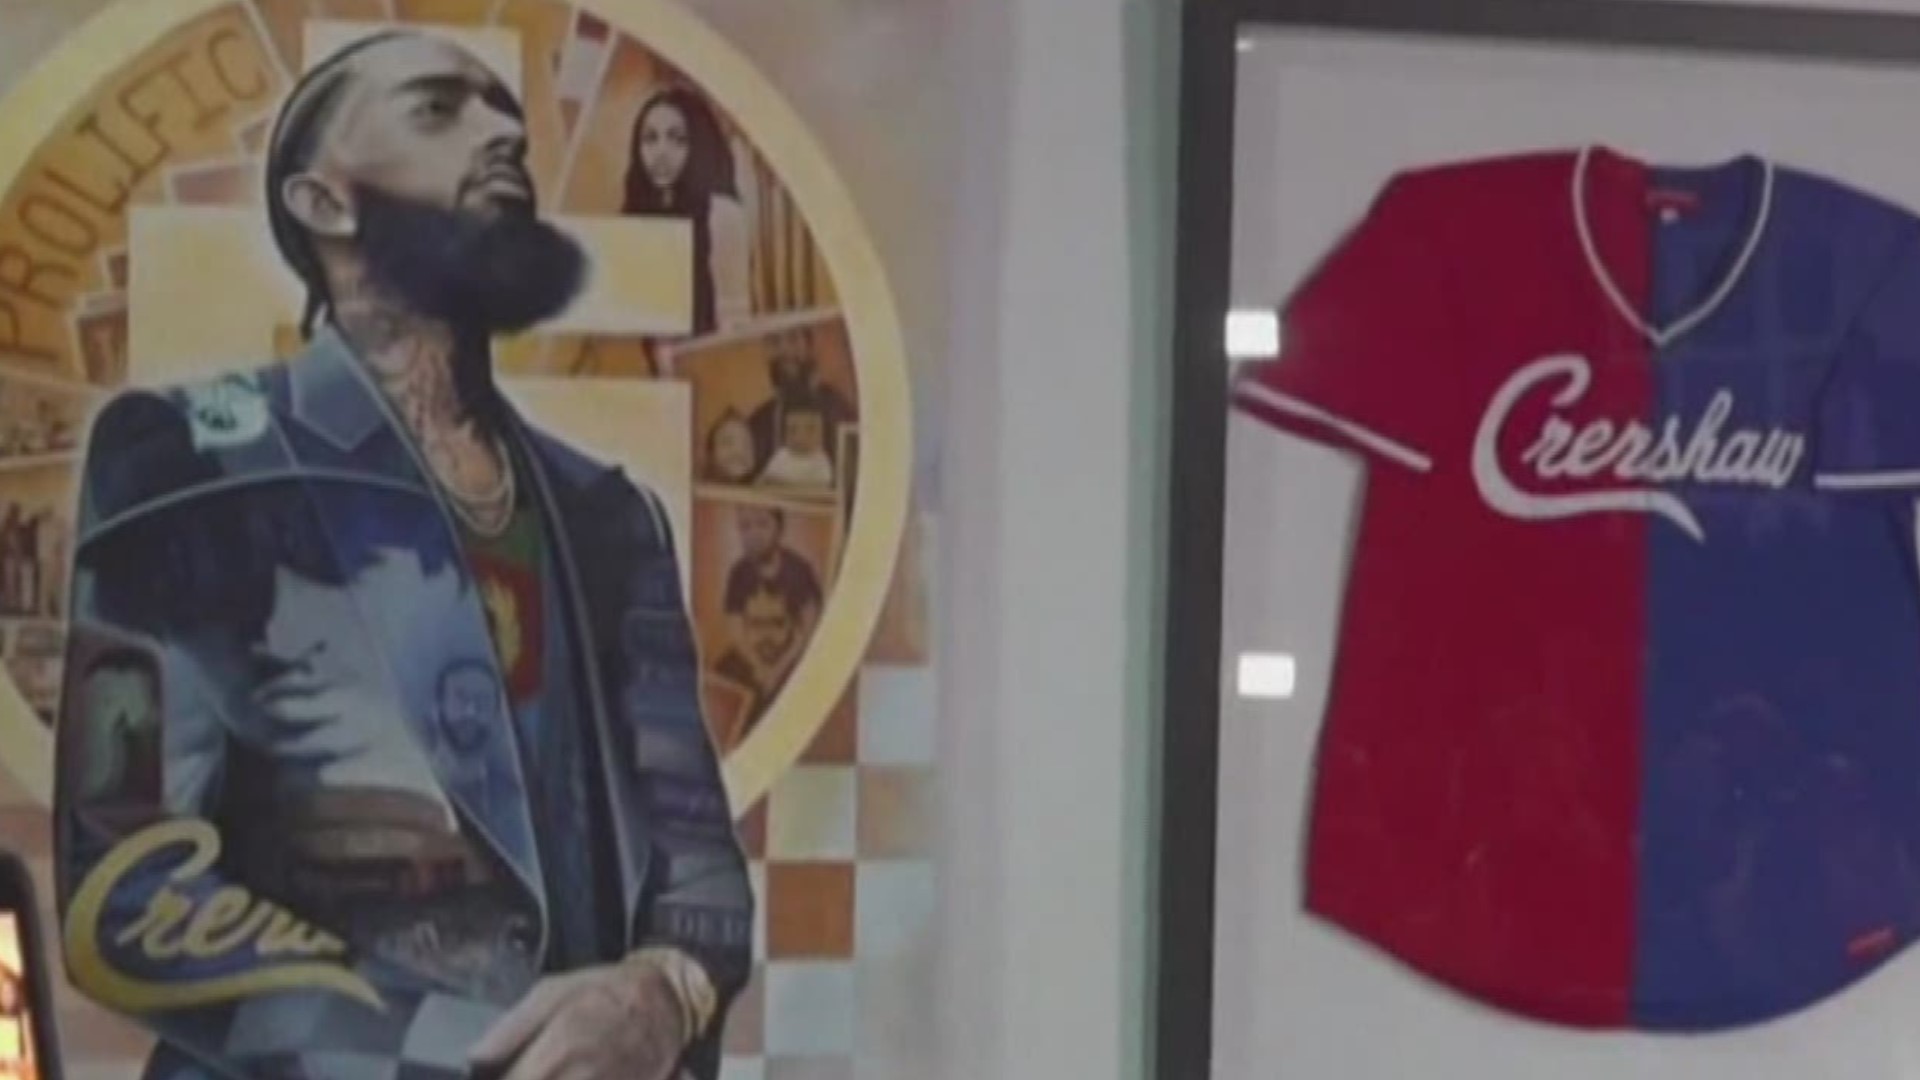 T.I. helped unveil the new pieces at the museum on Tuesday night in Atlanta. The entertainer and mogul spoke to 11Alive about how Nipsey Hussle inspired him and the story he hopes to tell with the new exhibit at the Trap Music Museum.